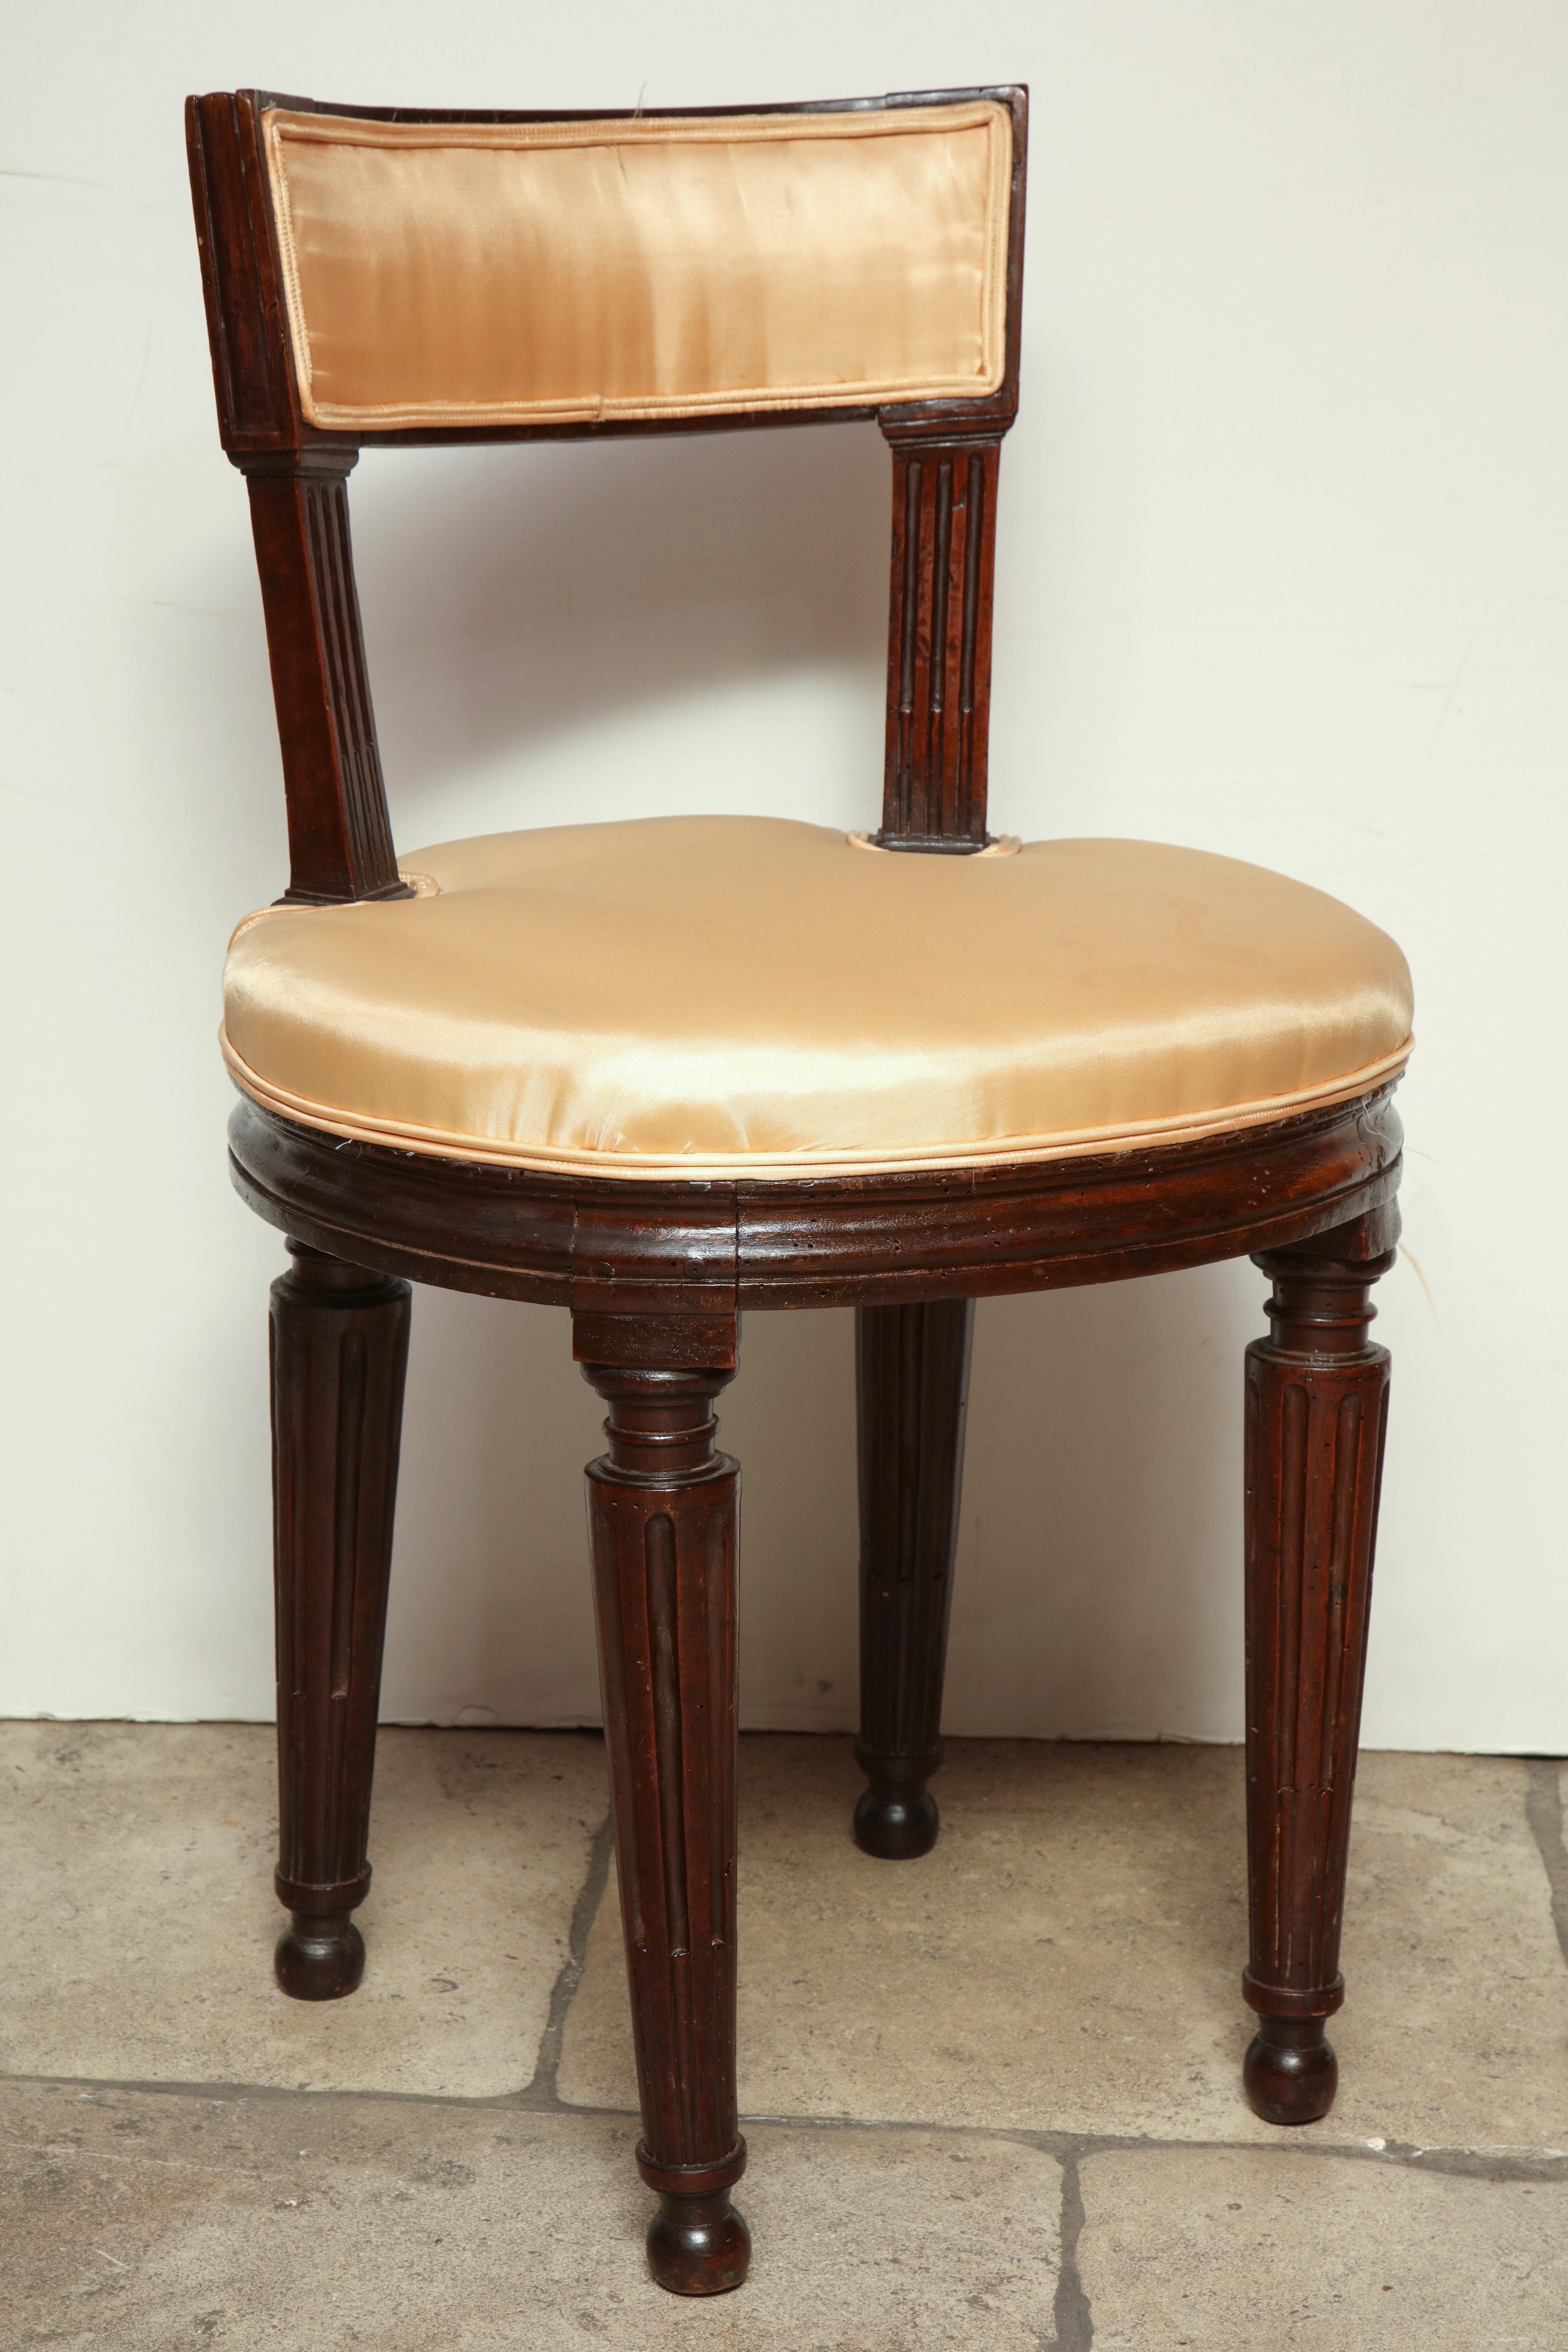 French Louis XVI walnut dressing stool in the Jacob manner, with molded and sides and fluted legs, with a round cushion seat and curved backrest.